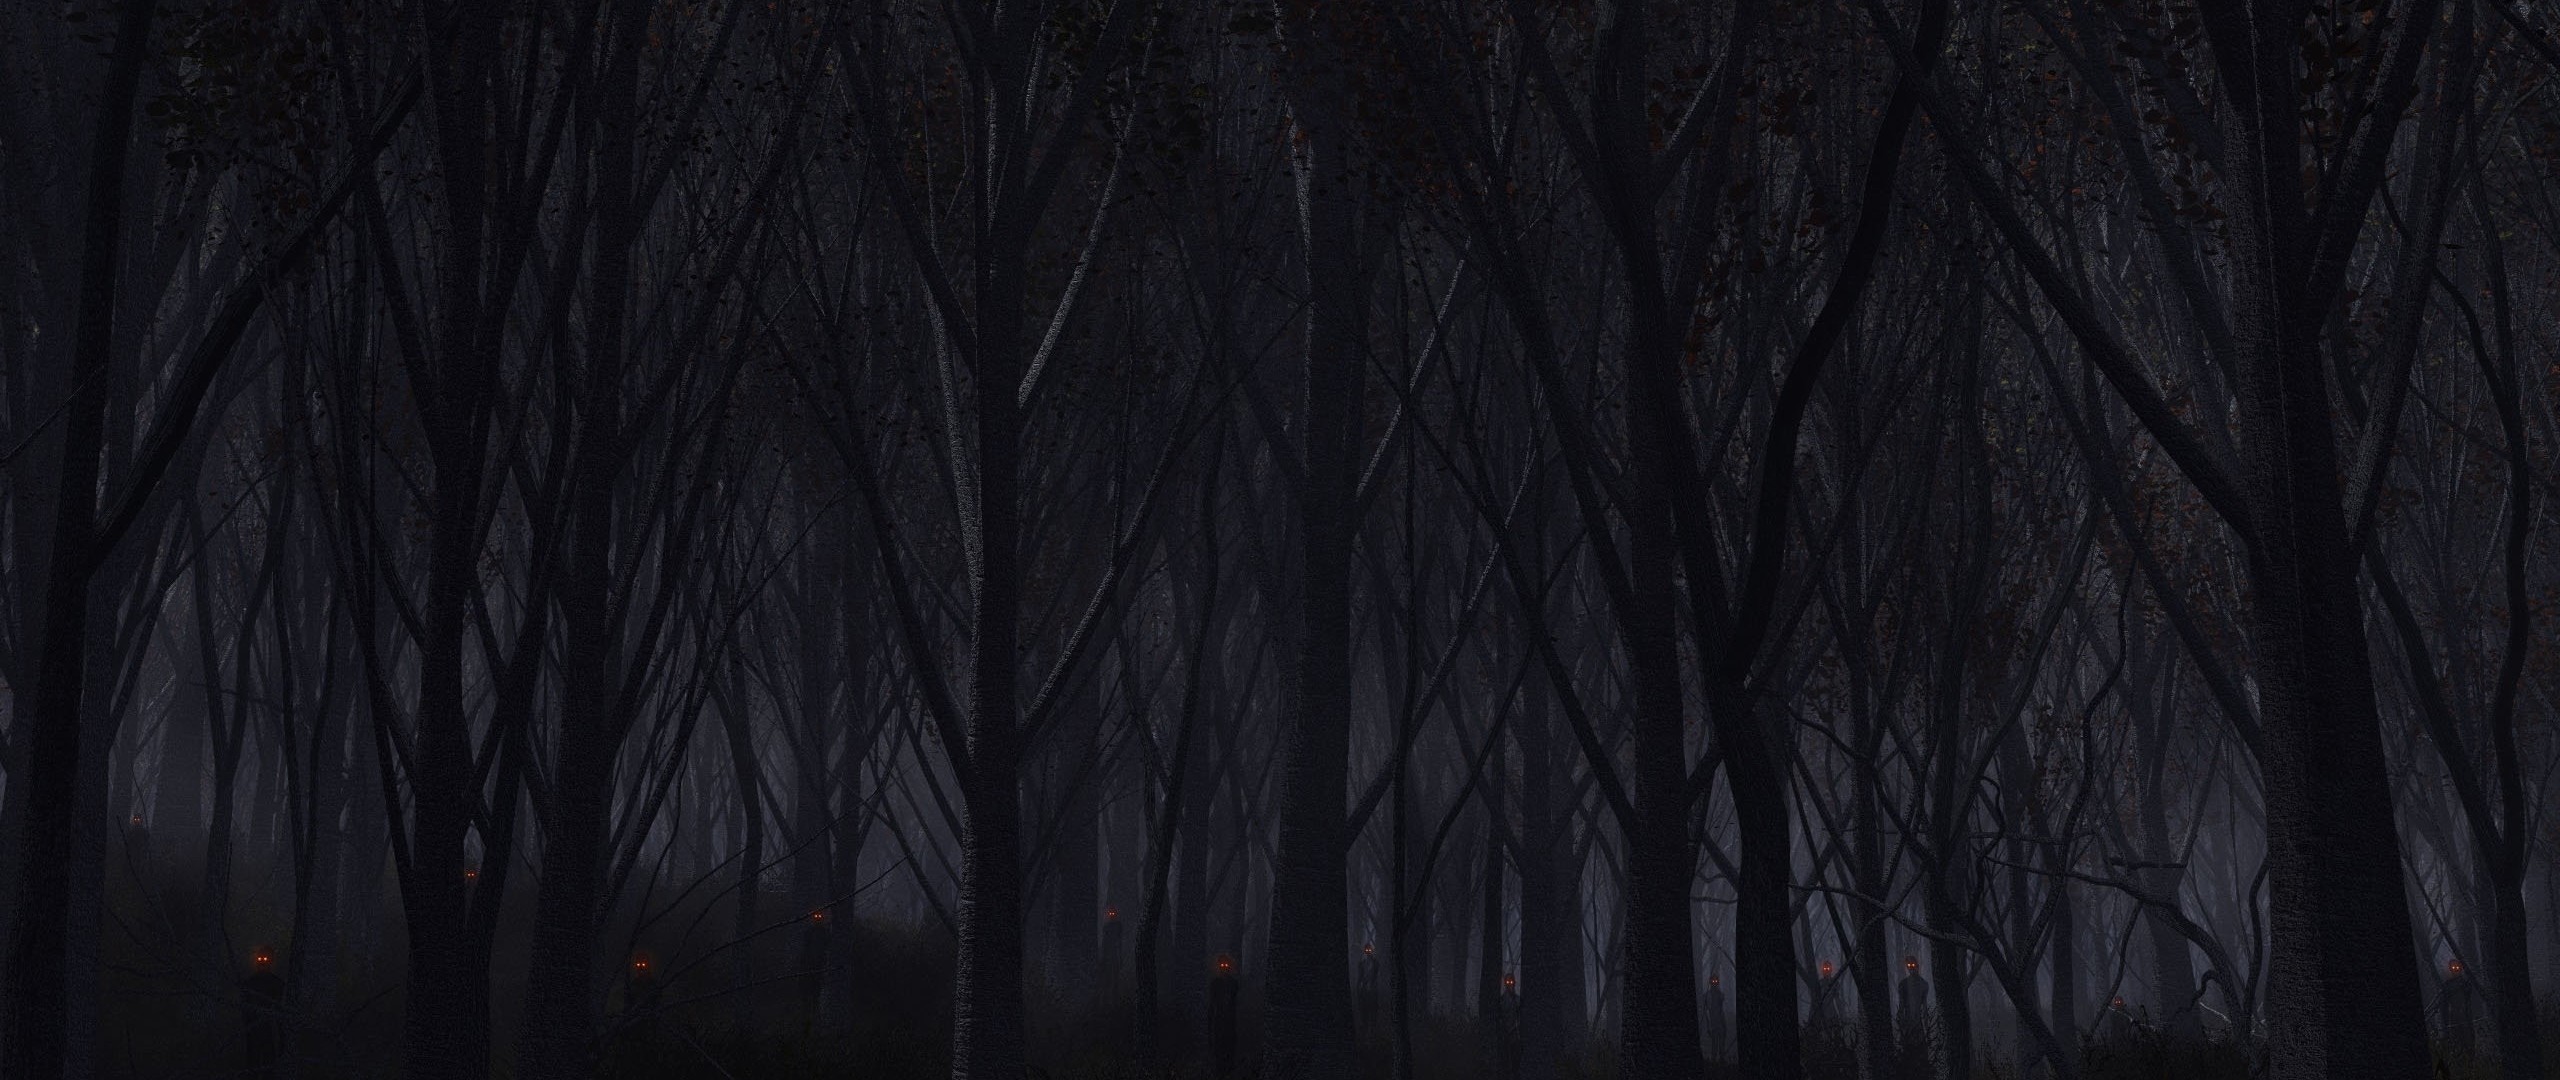 Preview Wallpaper Forest Trees Background Dark 2560x1080 2560x1080